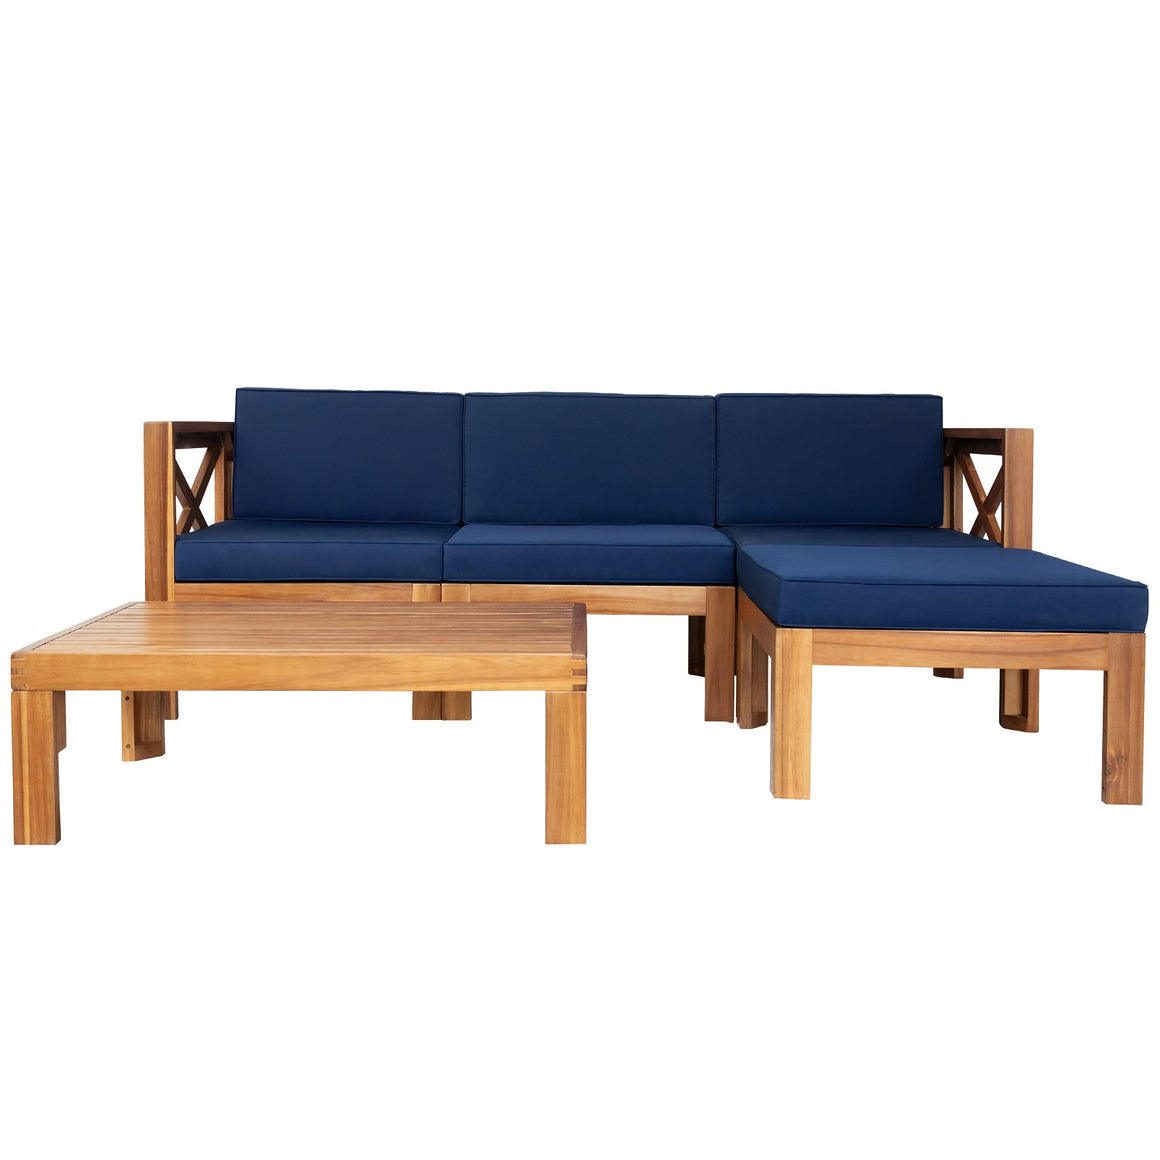 Fablise 5-Piece Patio Sectional Sofa Seating Group Set with Cushions in Natural Navy